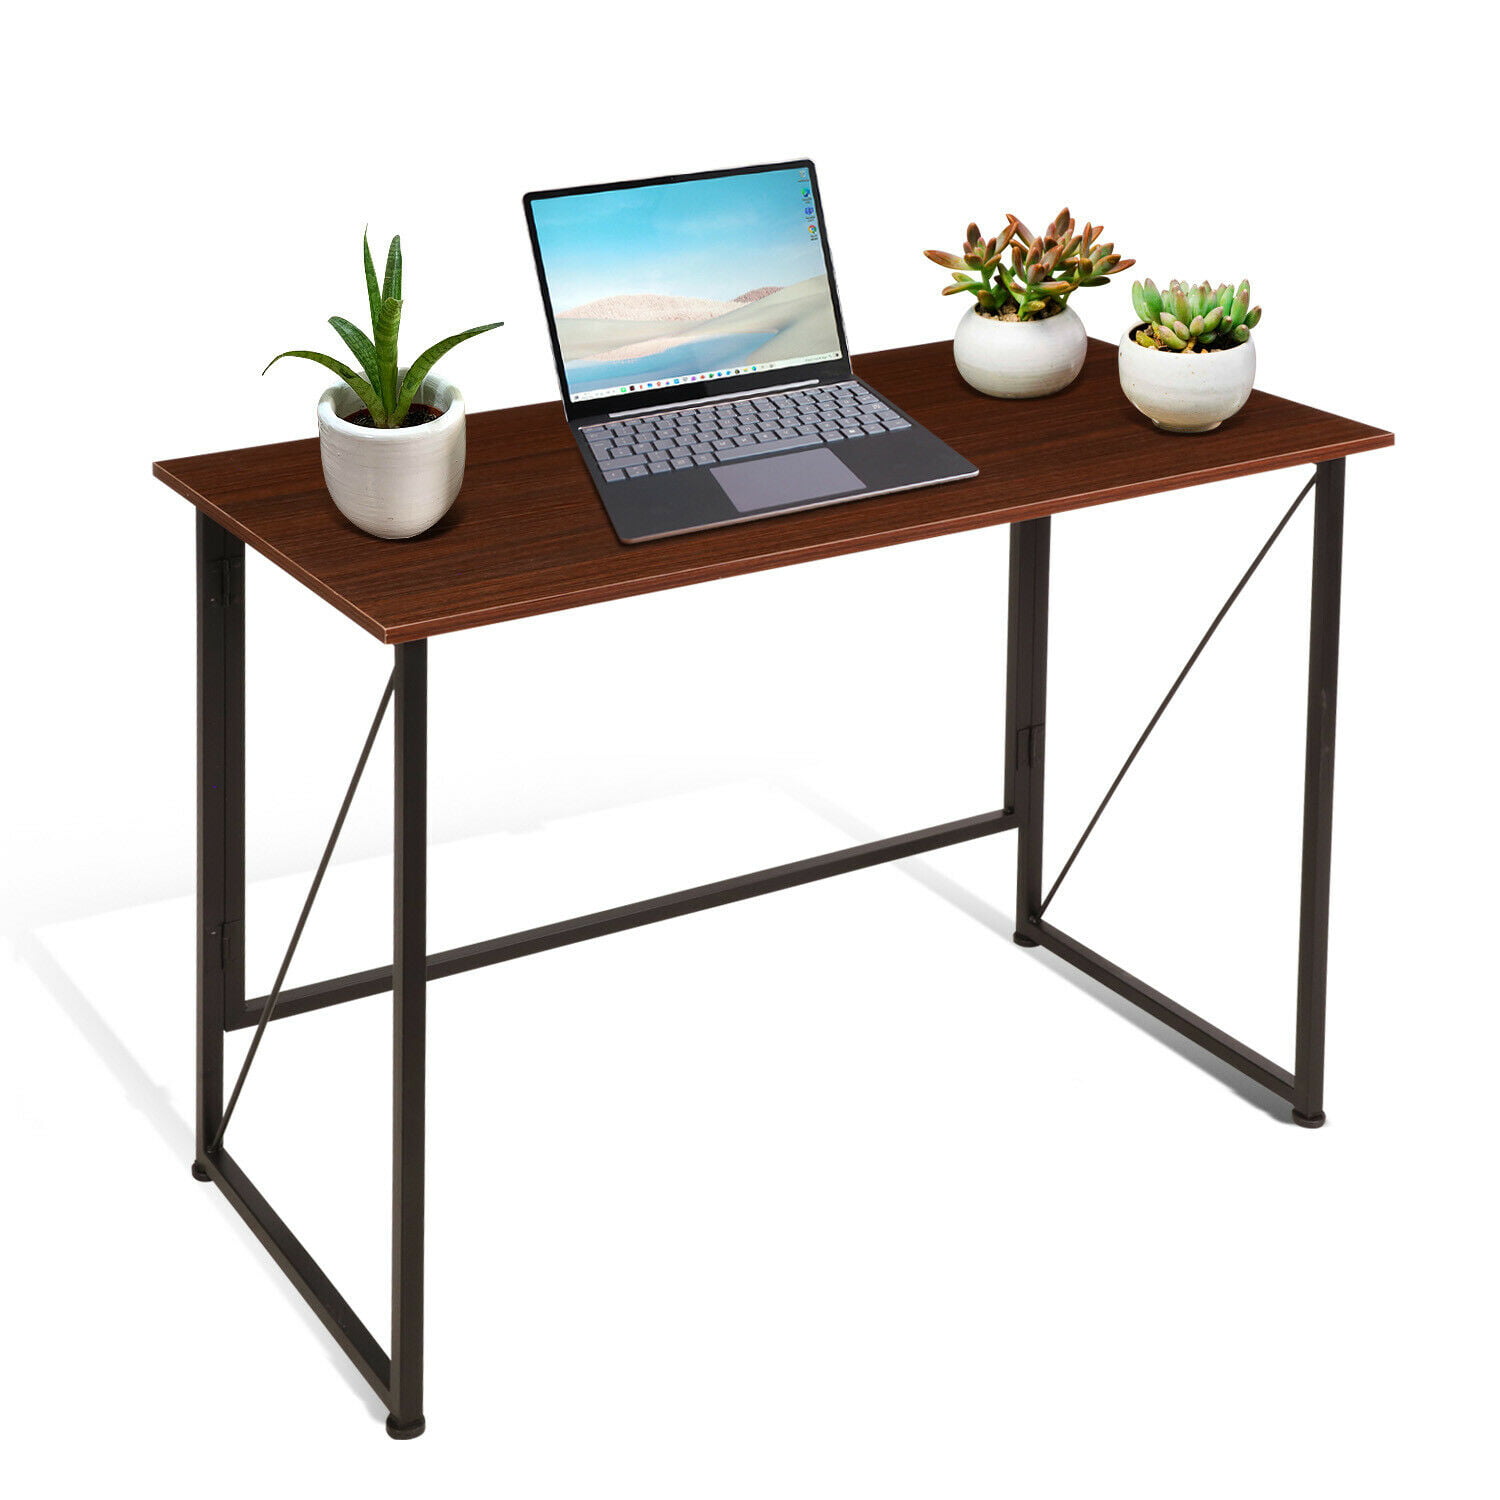 Details about   Small Folding Computer Desk Teens' Study Table Notebook Desk Home Office Black 